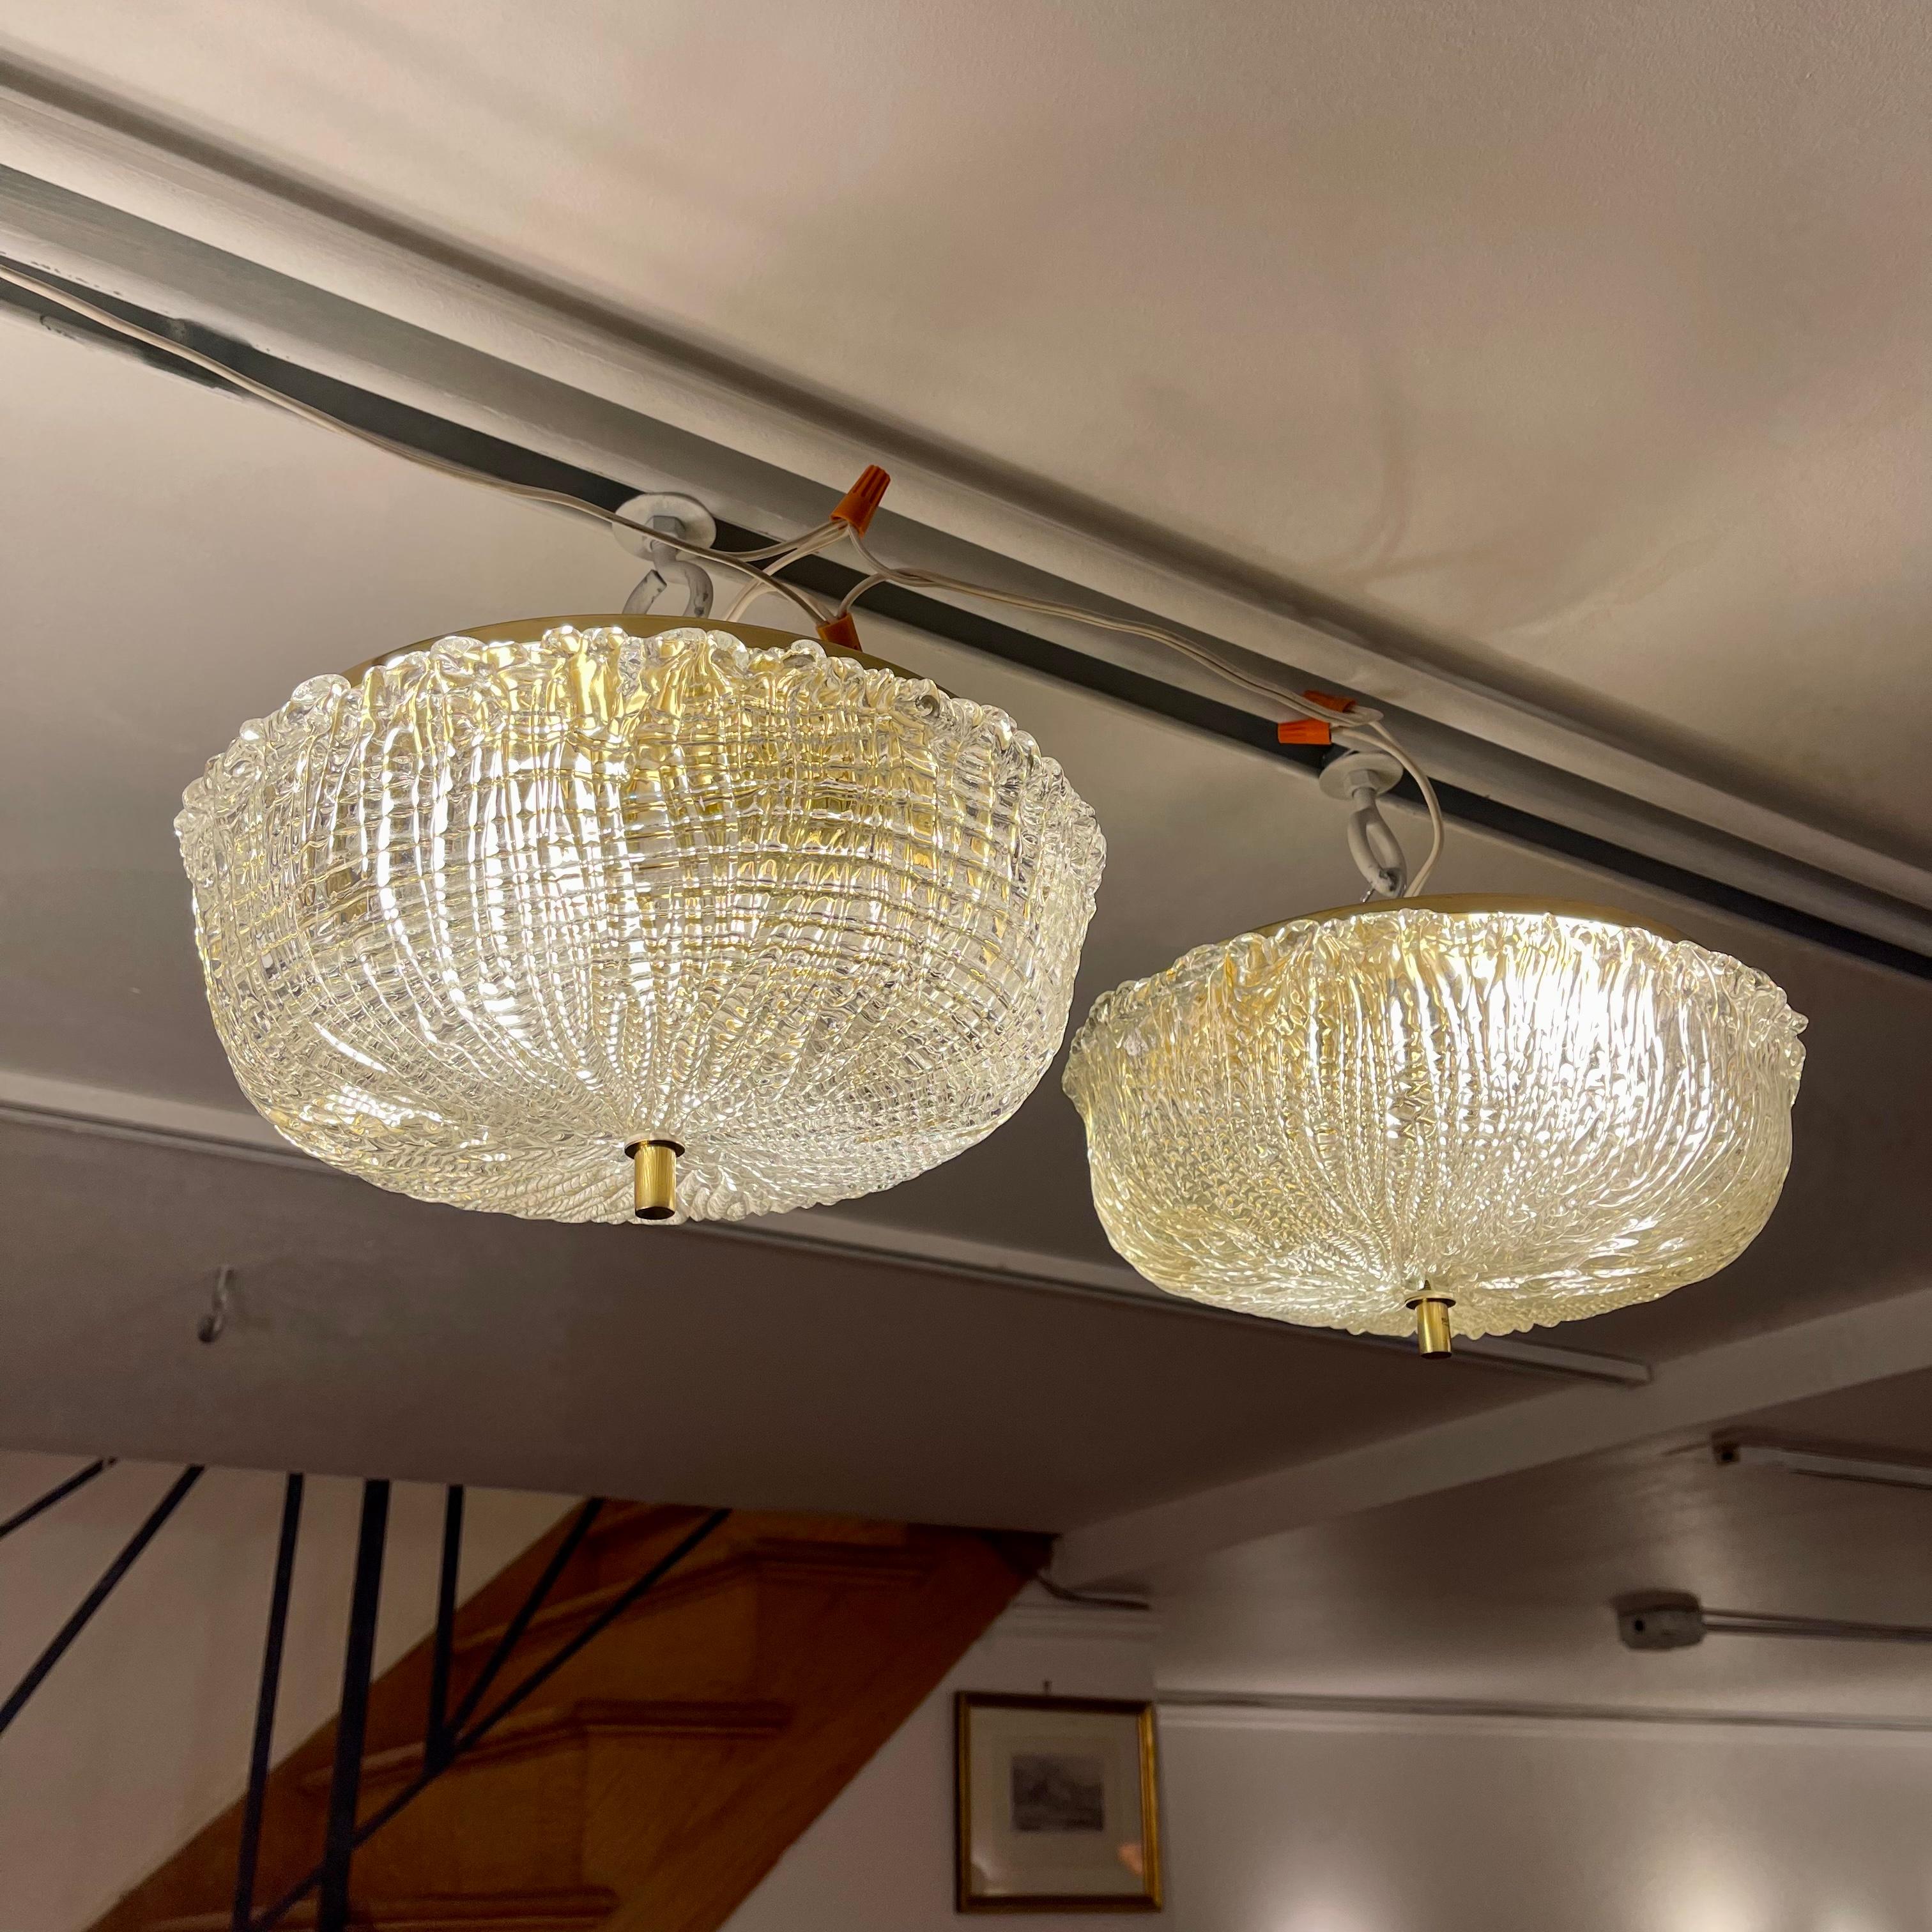 Hand cast crystal shades diffuse light beautifully. A brass ceiling plate mounts two standard medium base bulbs and reflects a rich golden hue back through the cast shades.